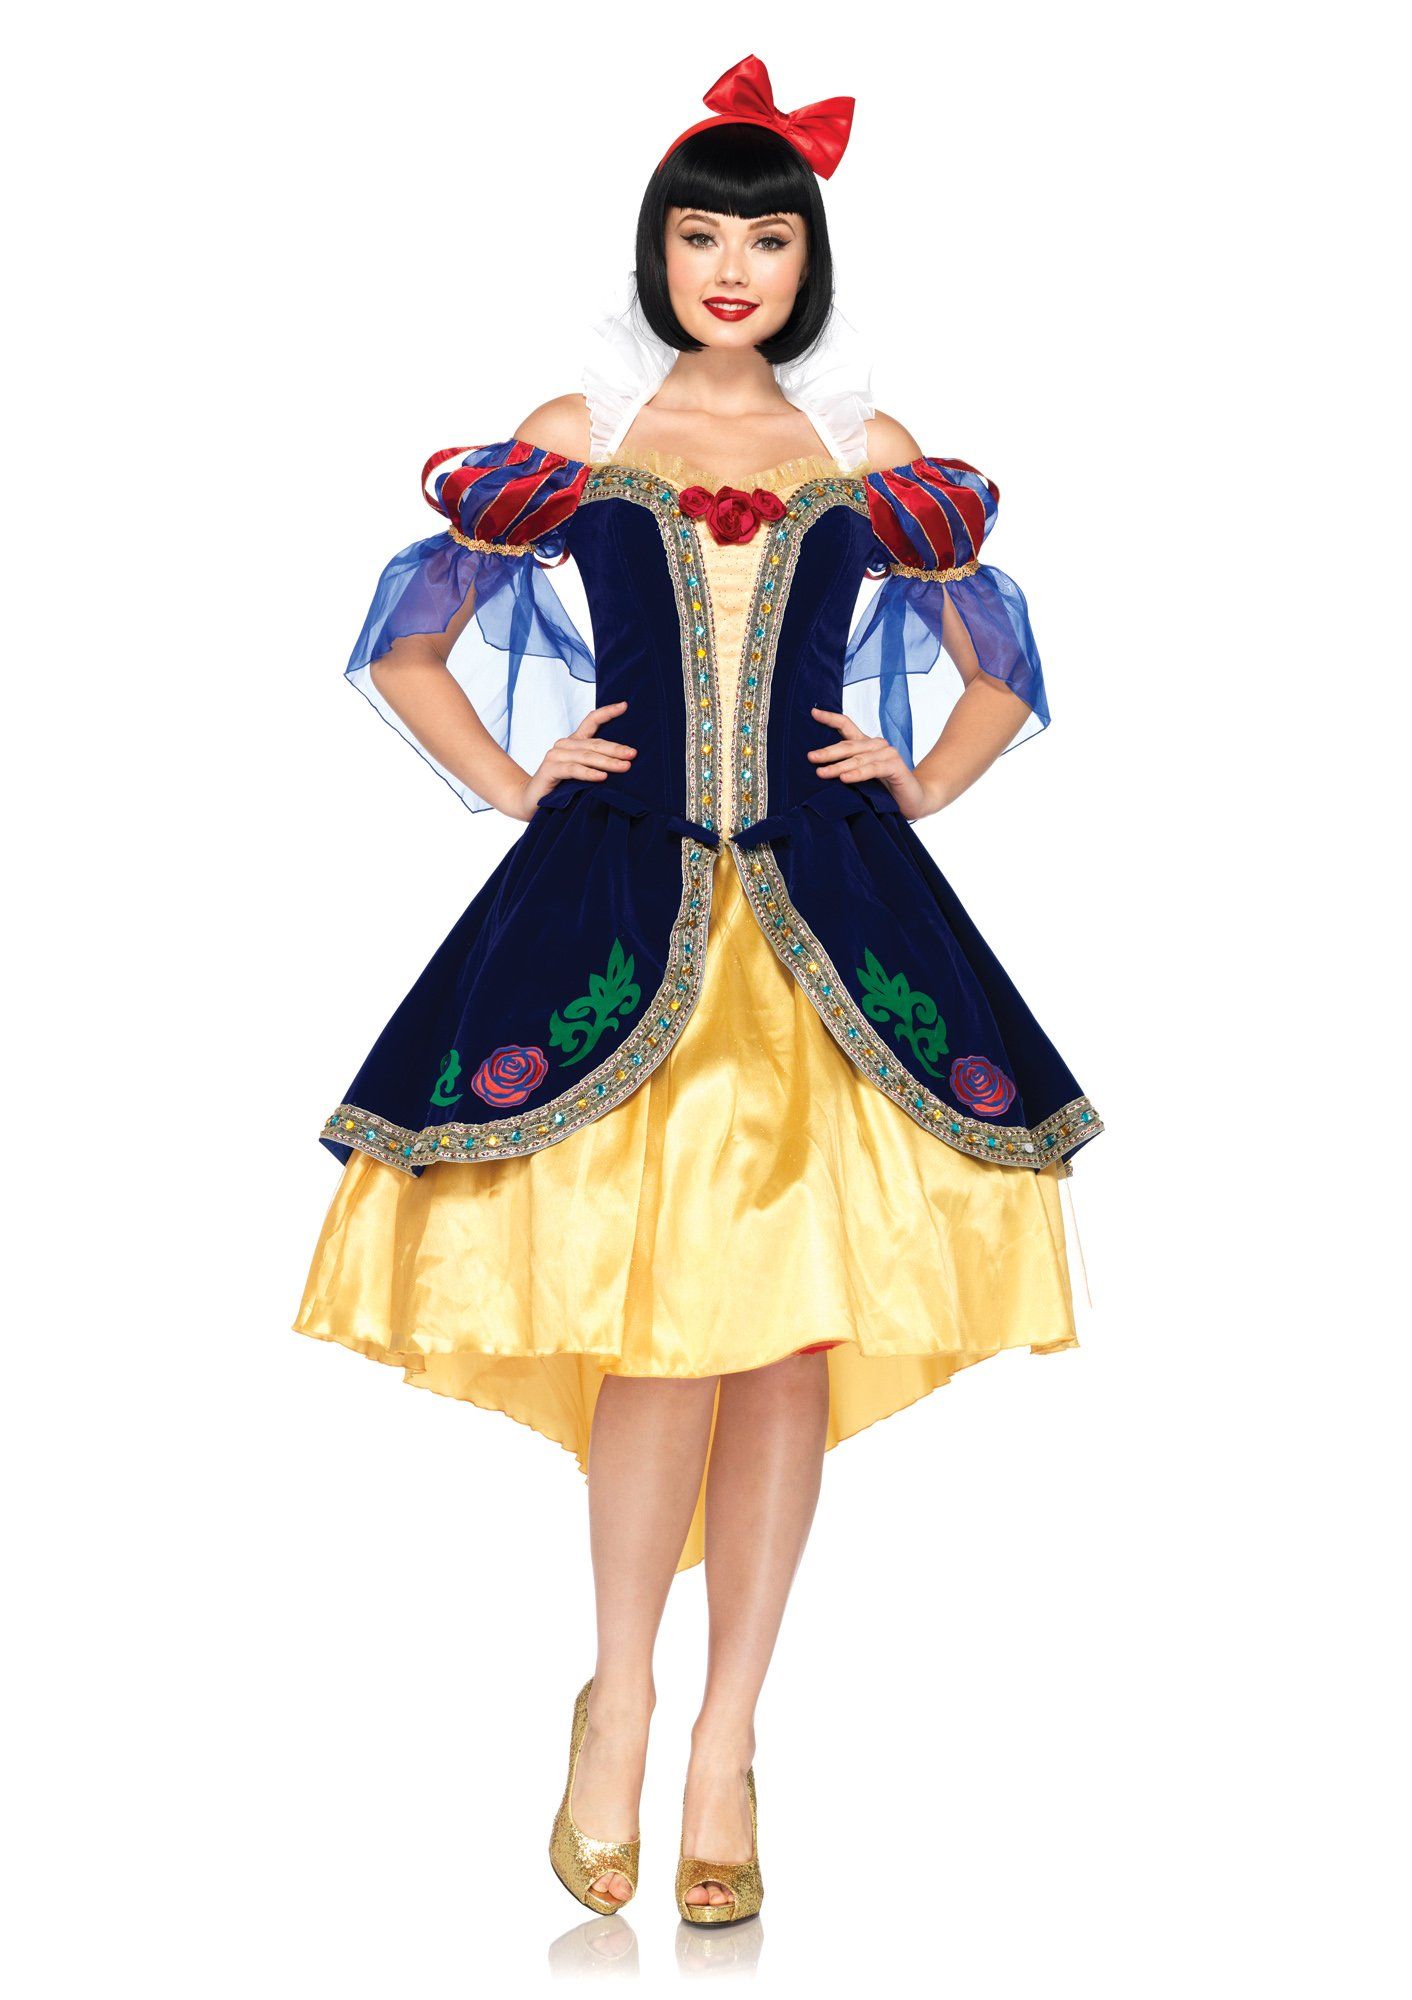 Prawn reccomend Snow white costumes for adults